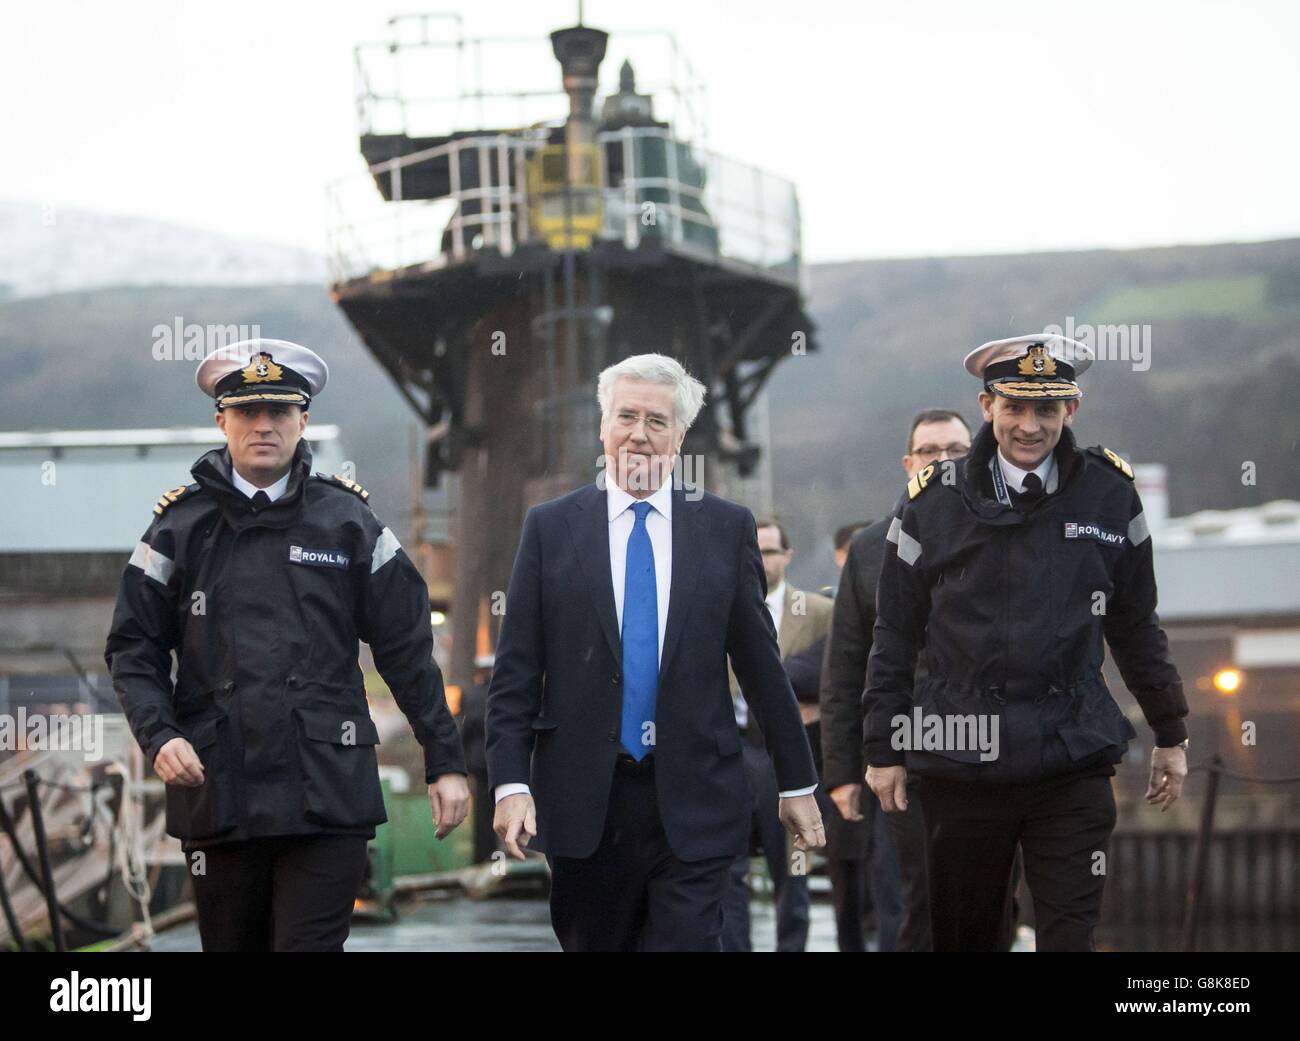 Defence Secretary Michael Fallon (centre) with Daniel Martyn (left) Commanding Officer of HMS Vigilant and Rear Admiral of Submarines and Assistant Chief of Naval Staff John Weale (right) during a visit to Vanguard-class submarine HMS Vigilant, one of the UK's four nuclear warhead-carrying submarines, at HM Naval Base Clyde, also known as Faslane, in Scotland. Stock Photo